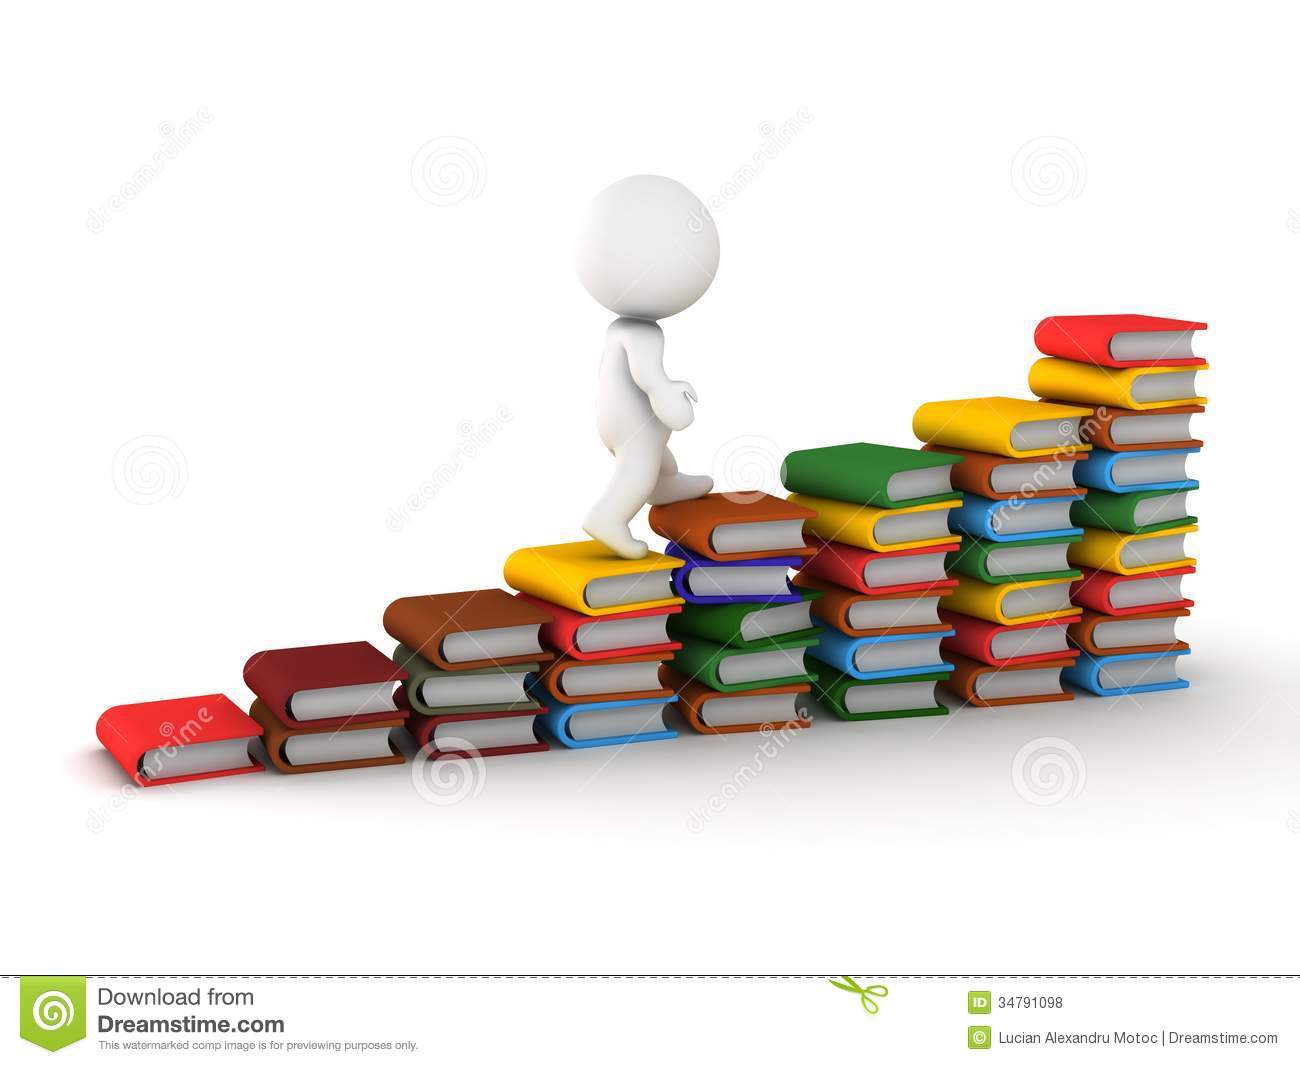 3d Man Climbing Stairs Made Of Books Royalty Free Stock Photos   Image